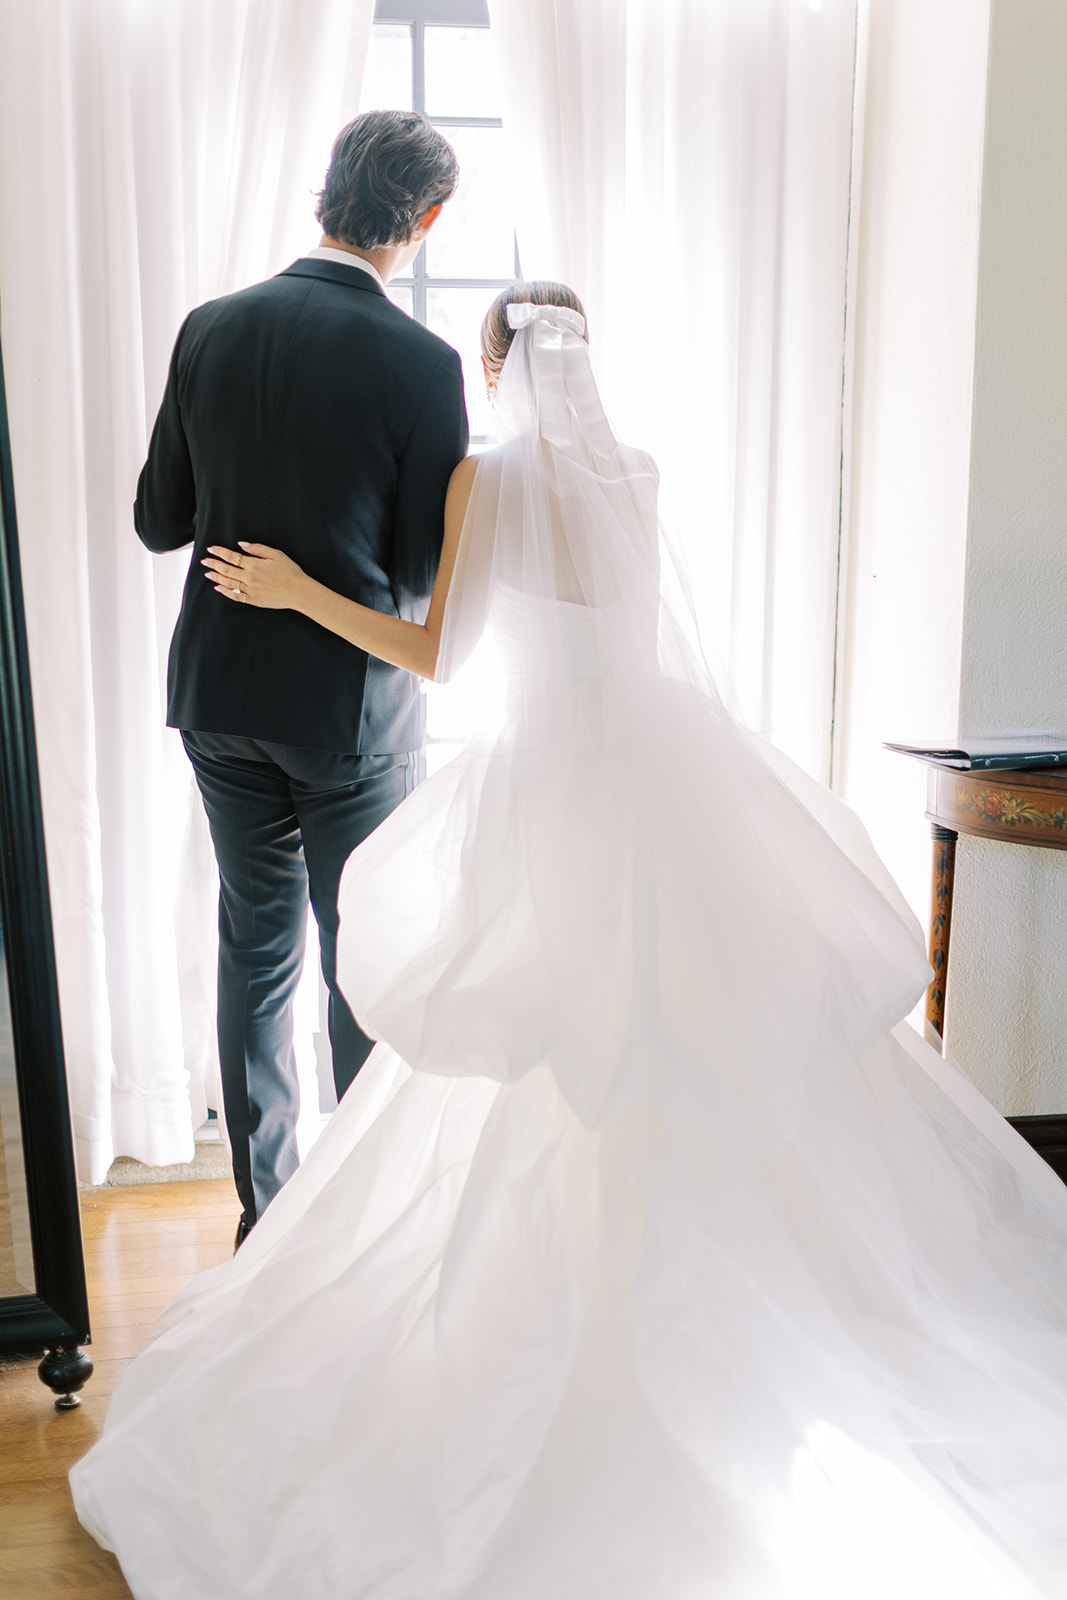 bride and groom peek through the window in intimate moment for Timeless Wedding at Parque Historic Hunting Hill Mansion